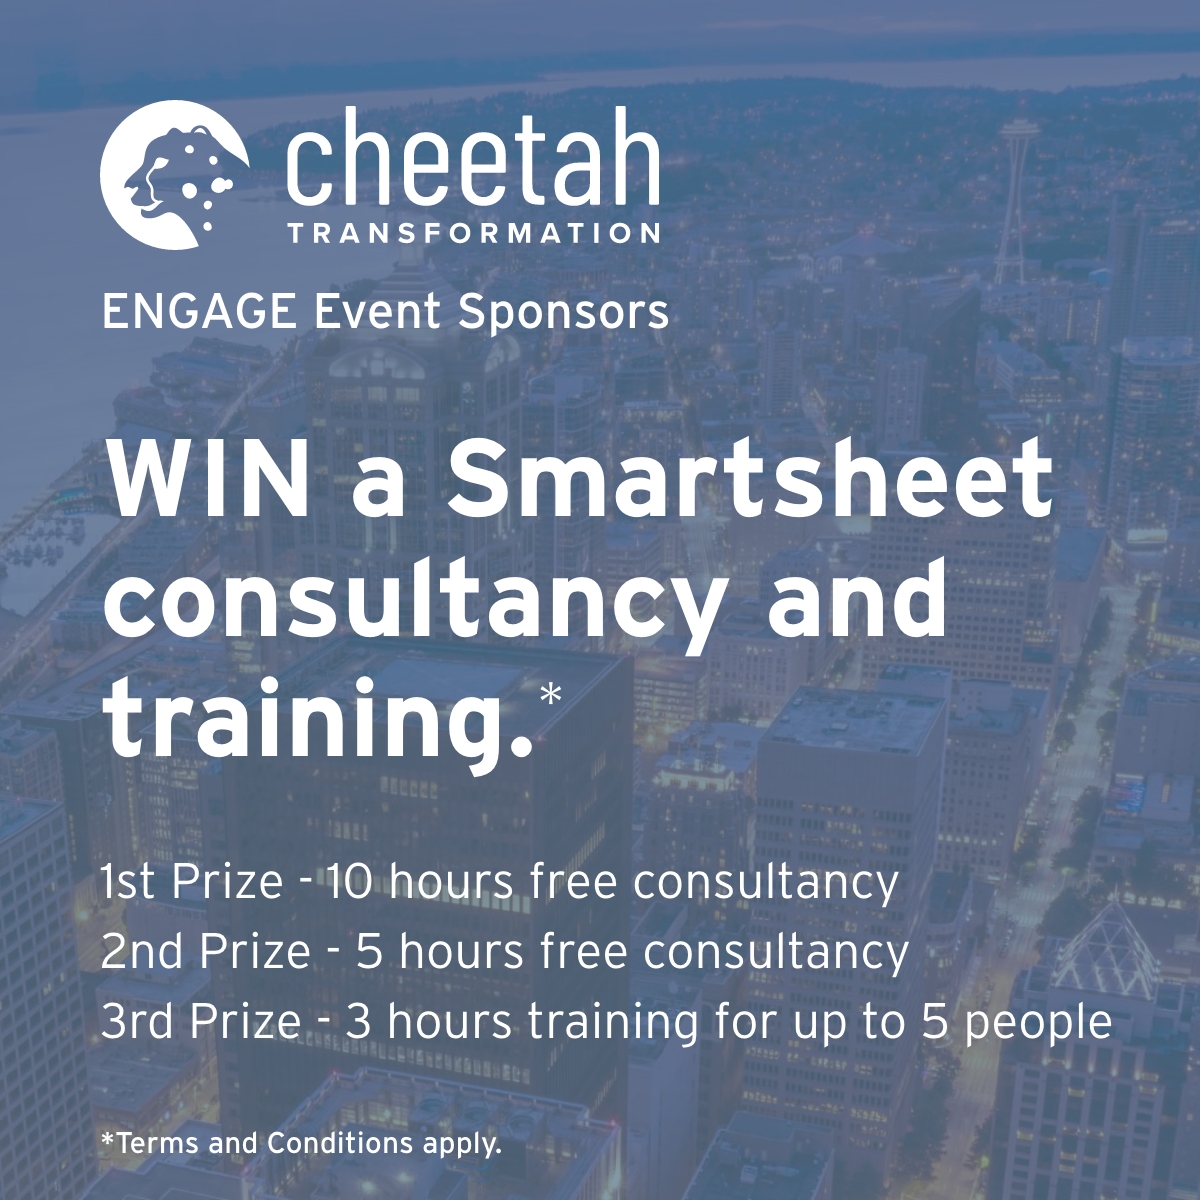 Get even more from #SmartsheetENGAGE! Follow us on LinkedIn for a chance to WIN

1st - 10 hrs free consultancy
2nd - 5 hrs free consultancy
3rd - 3 hrs training for up to 5 people

Giveaway closes at midnight PT on 21st Sept 2023. T&Cs apply.

Enter ➡️ linkedin.com/company/cheeta…